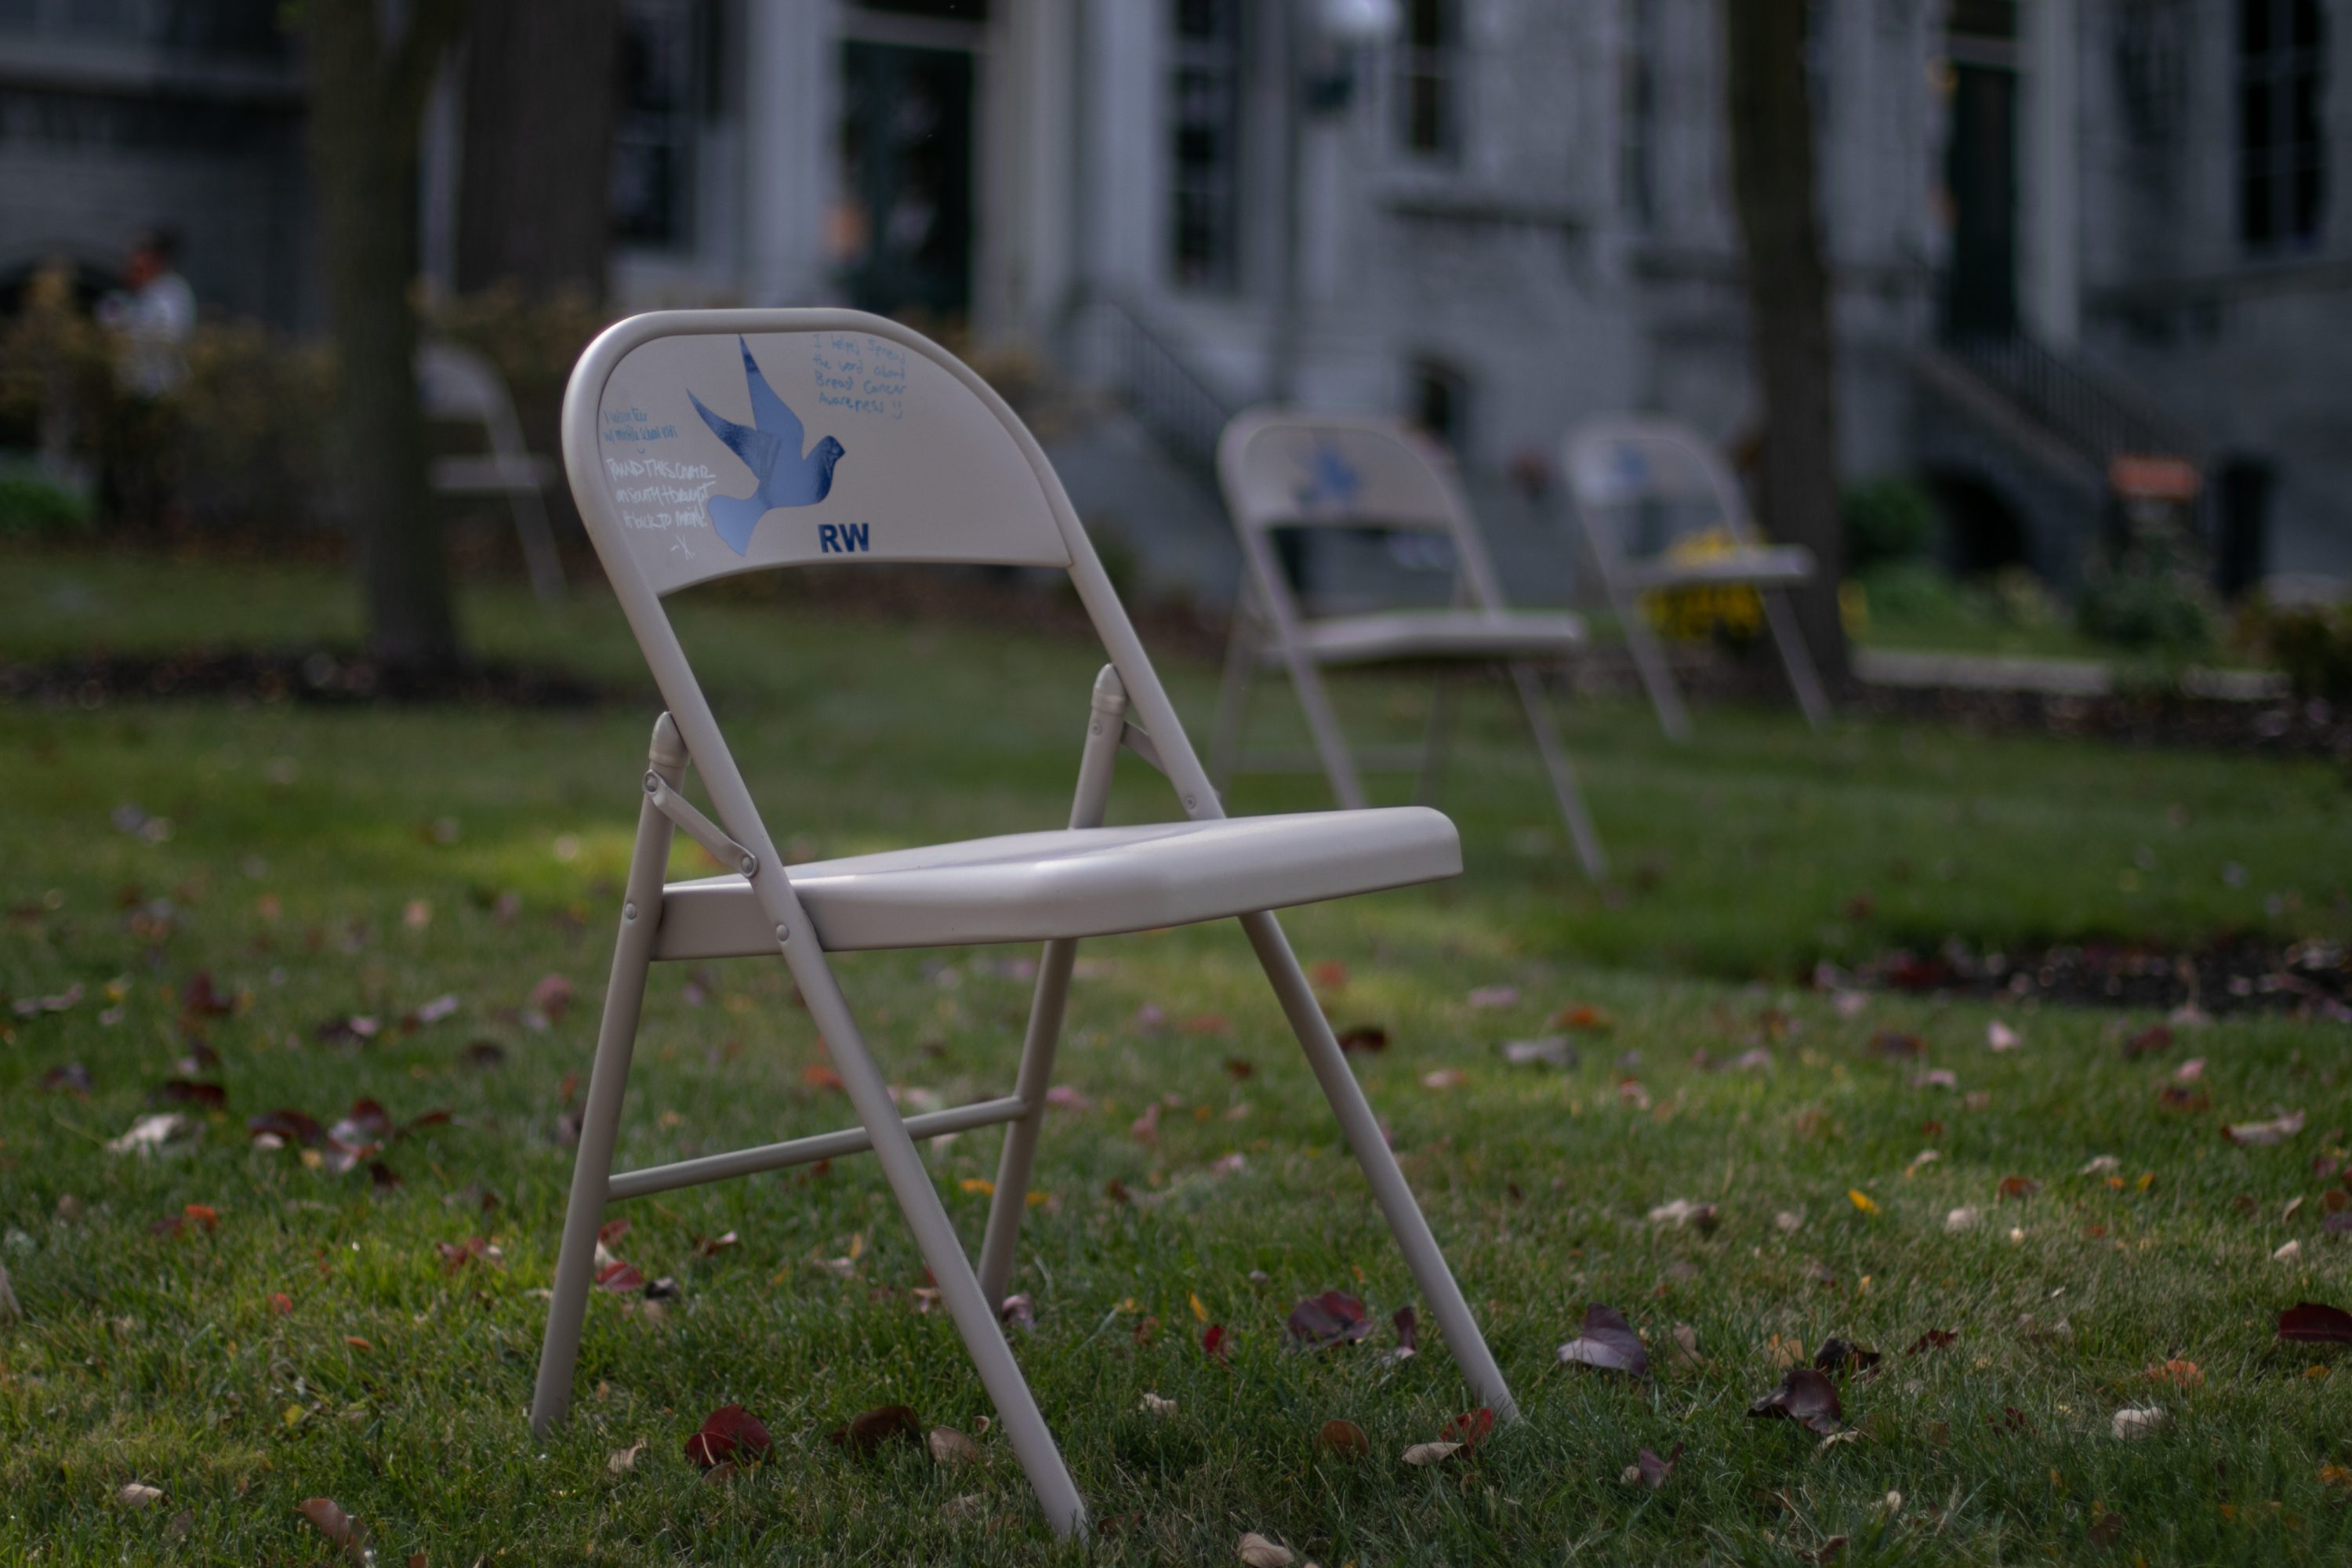 The 2020 Remembrance Scholars sit in front of SU's Hall of Languages from 1:25 pm to 2:01 pm to symbolize the time of flight for Pan Am Flight 103.